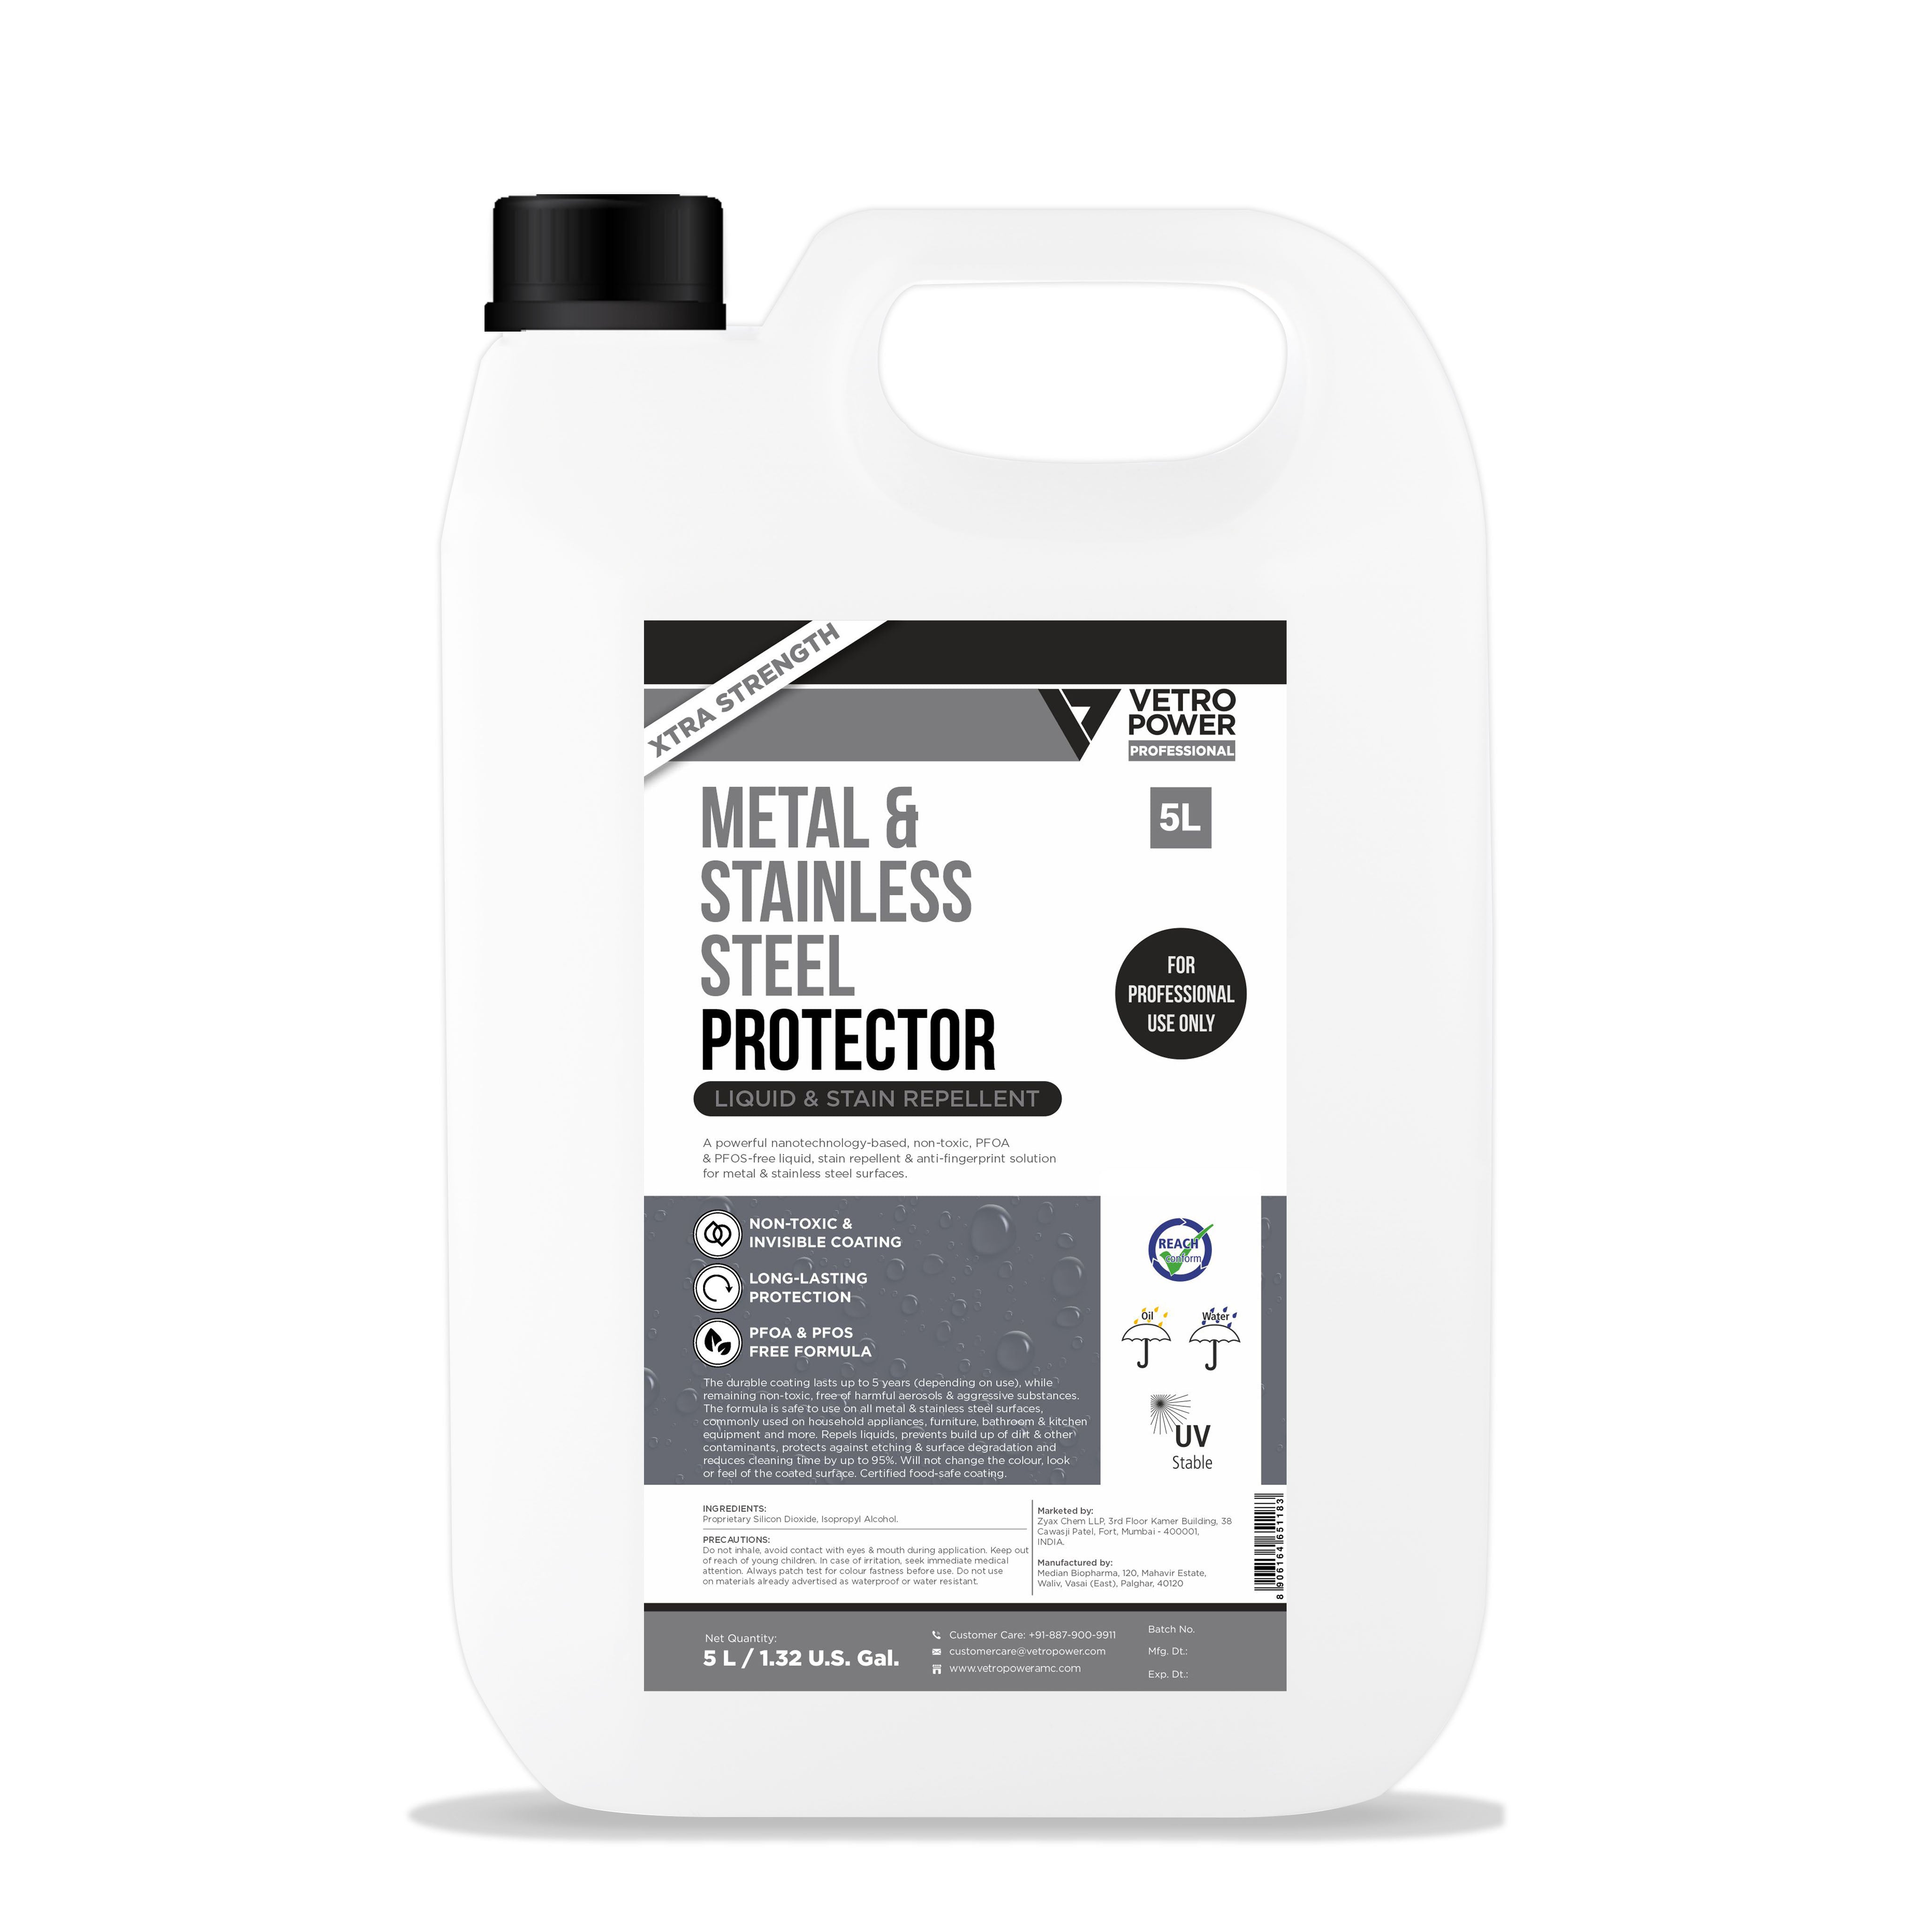 Vetro Power Professional Metal & Stainless Steel Protector 5L